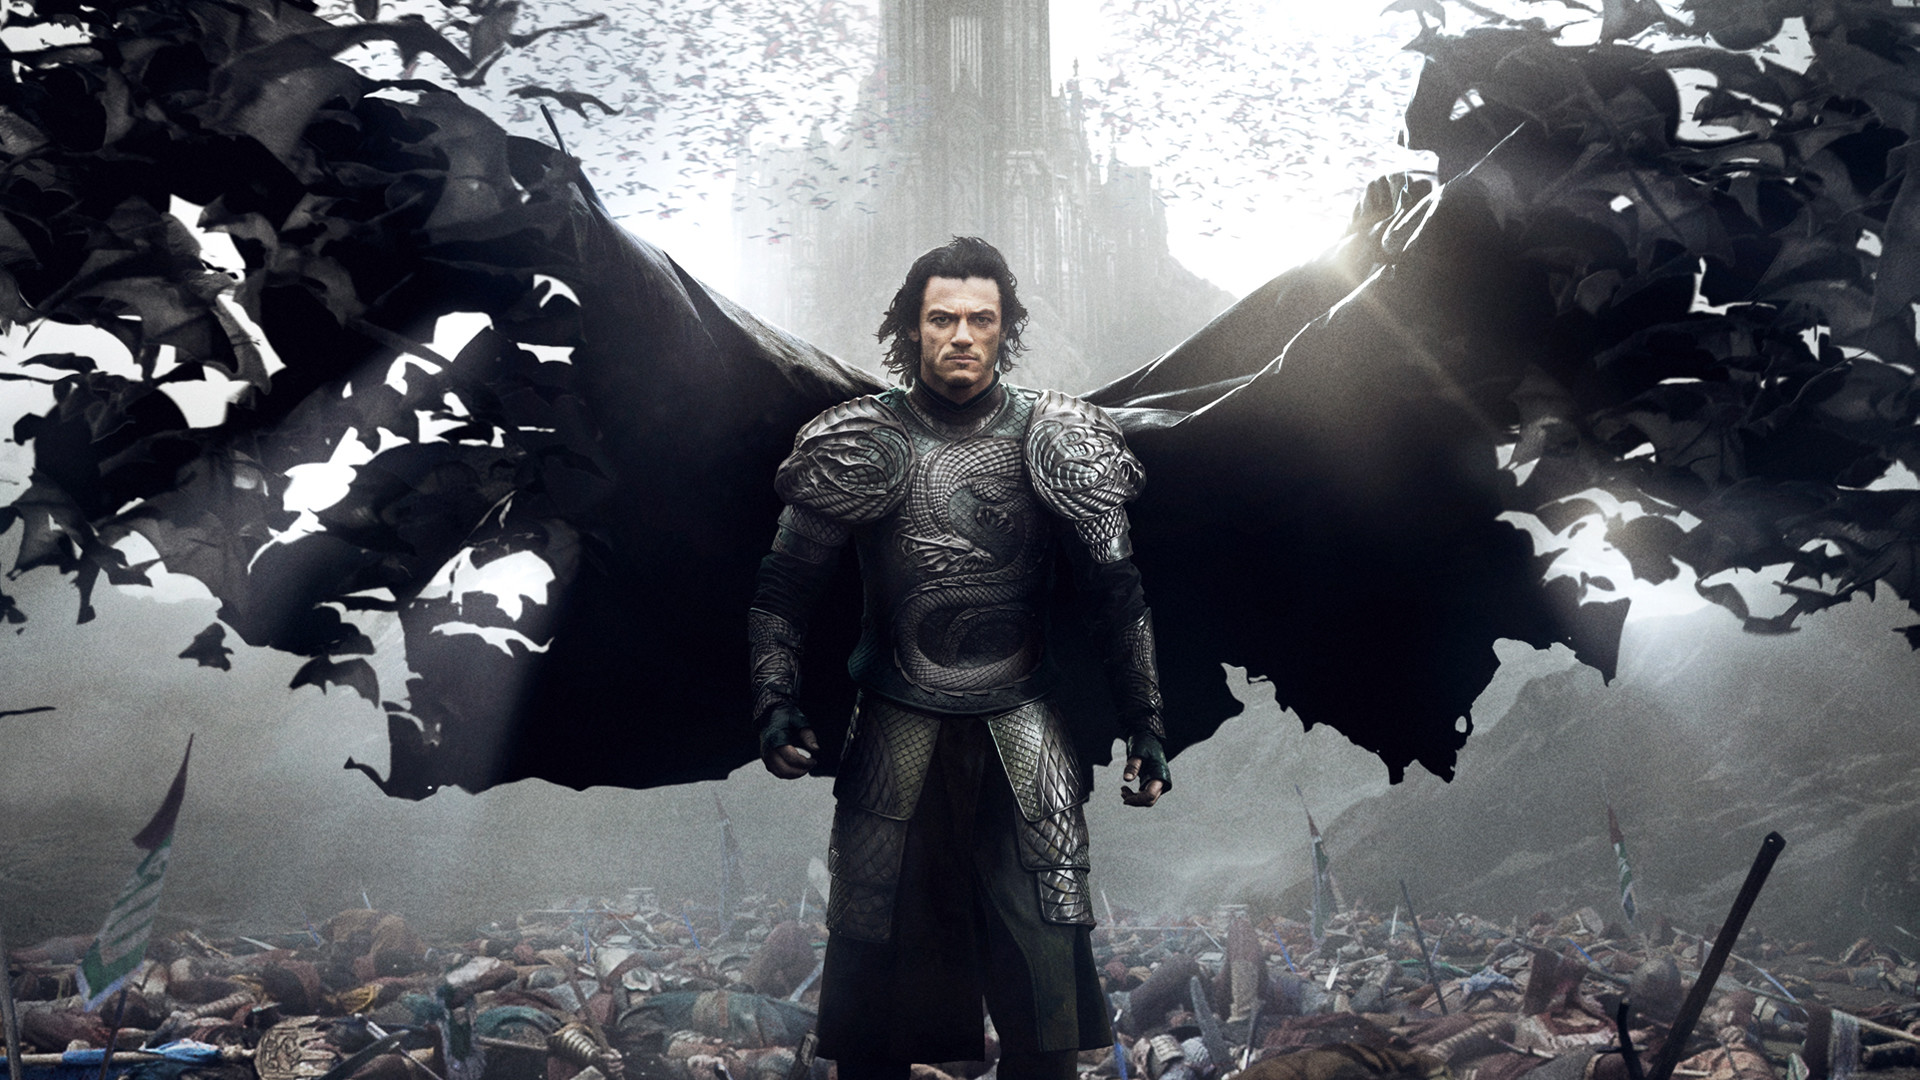 1920x1080 HD Widescreen Wallpapers: Dracula Untold Wallpapers And ..